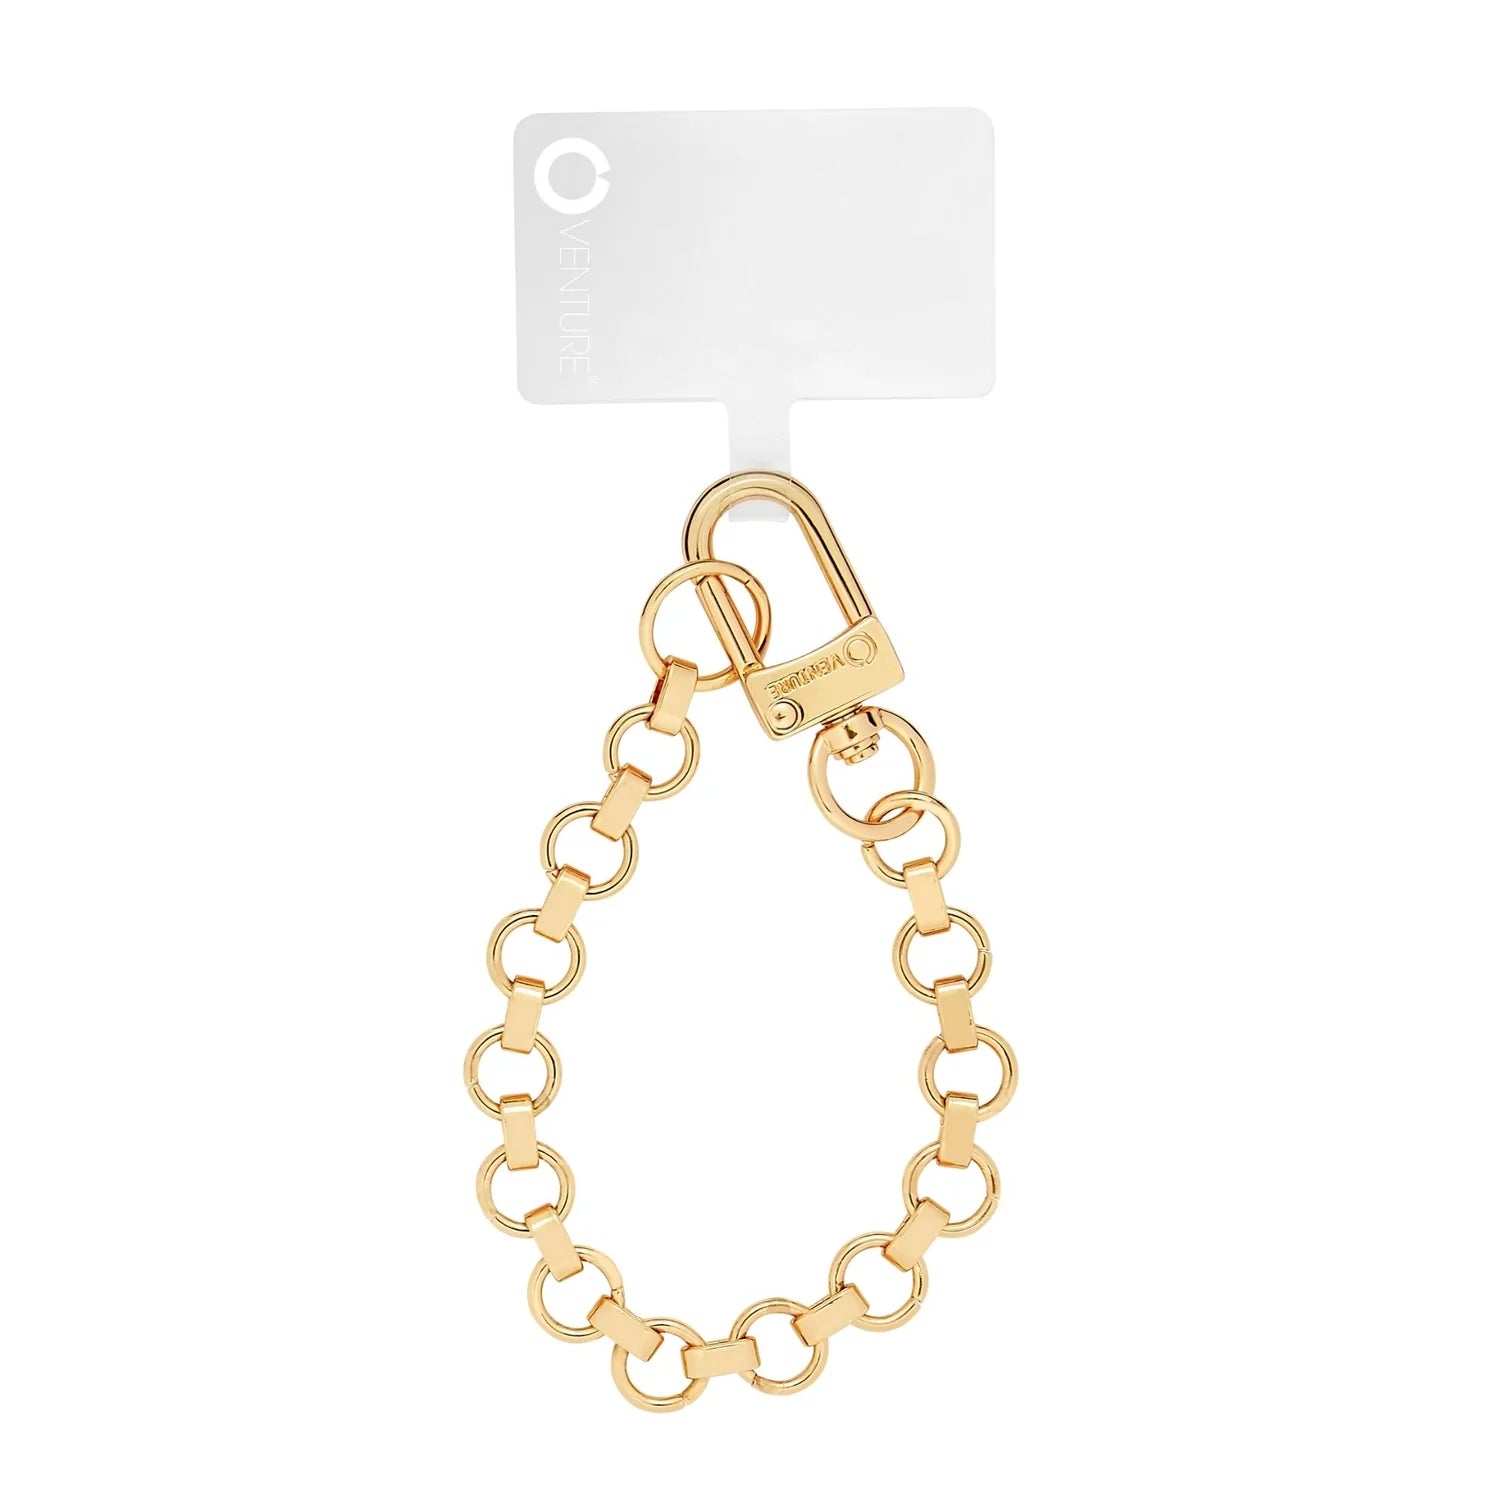 Hook Me Up Hands-Free Phone Wristlet Chain - Gold Rush